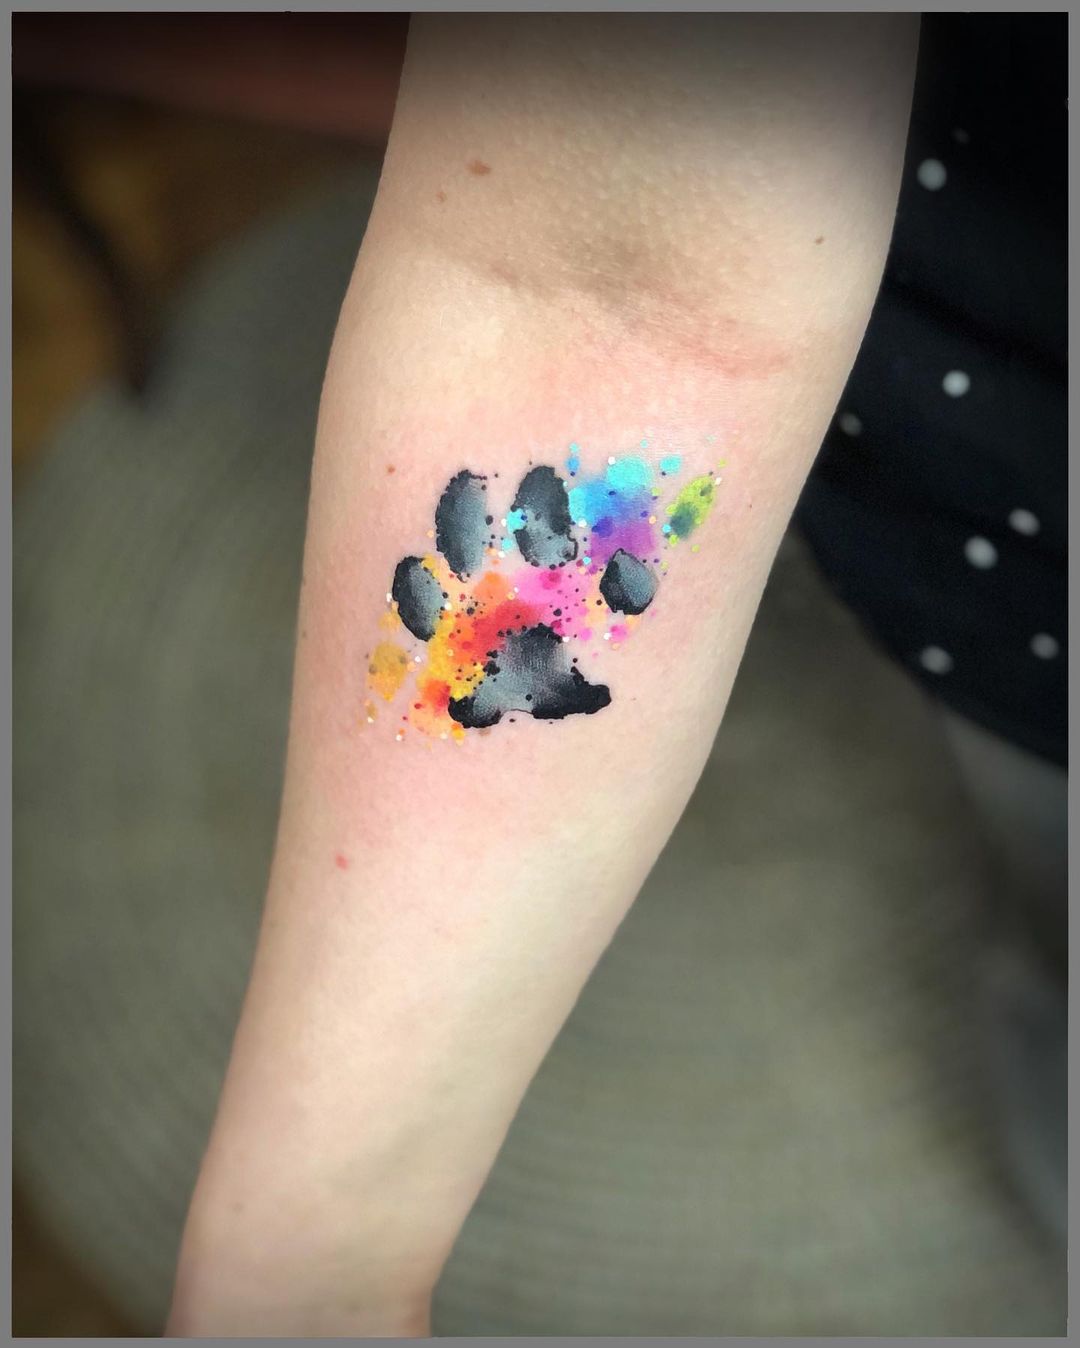 30 Beautiful Photos Of Watercolour Tattoos | HuffPost Style